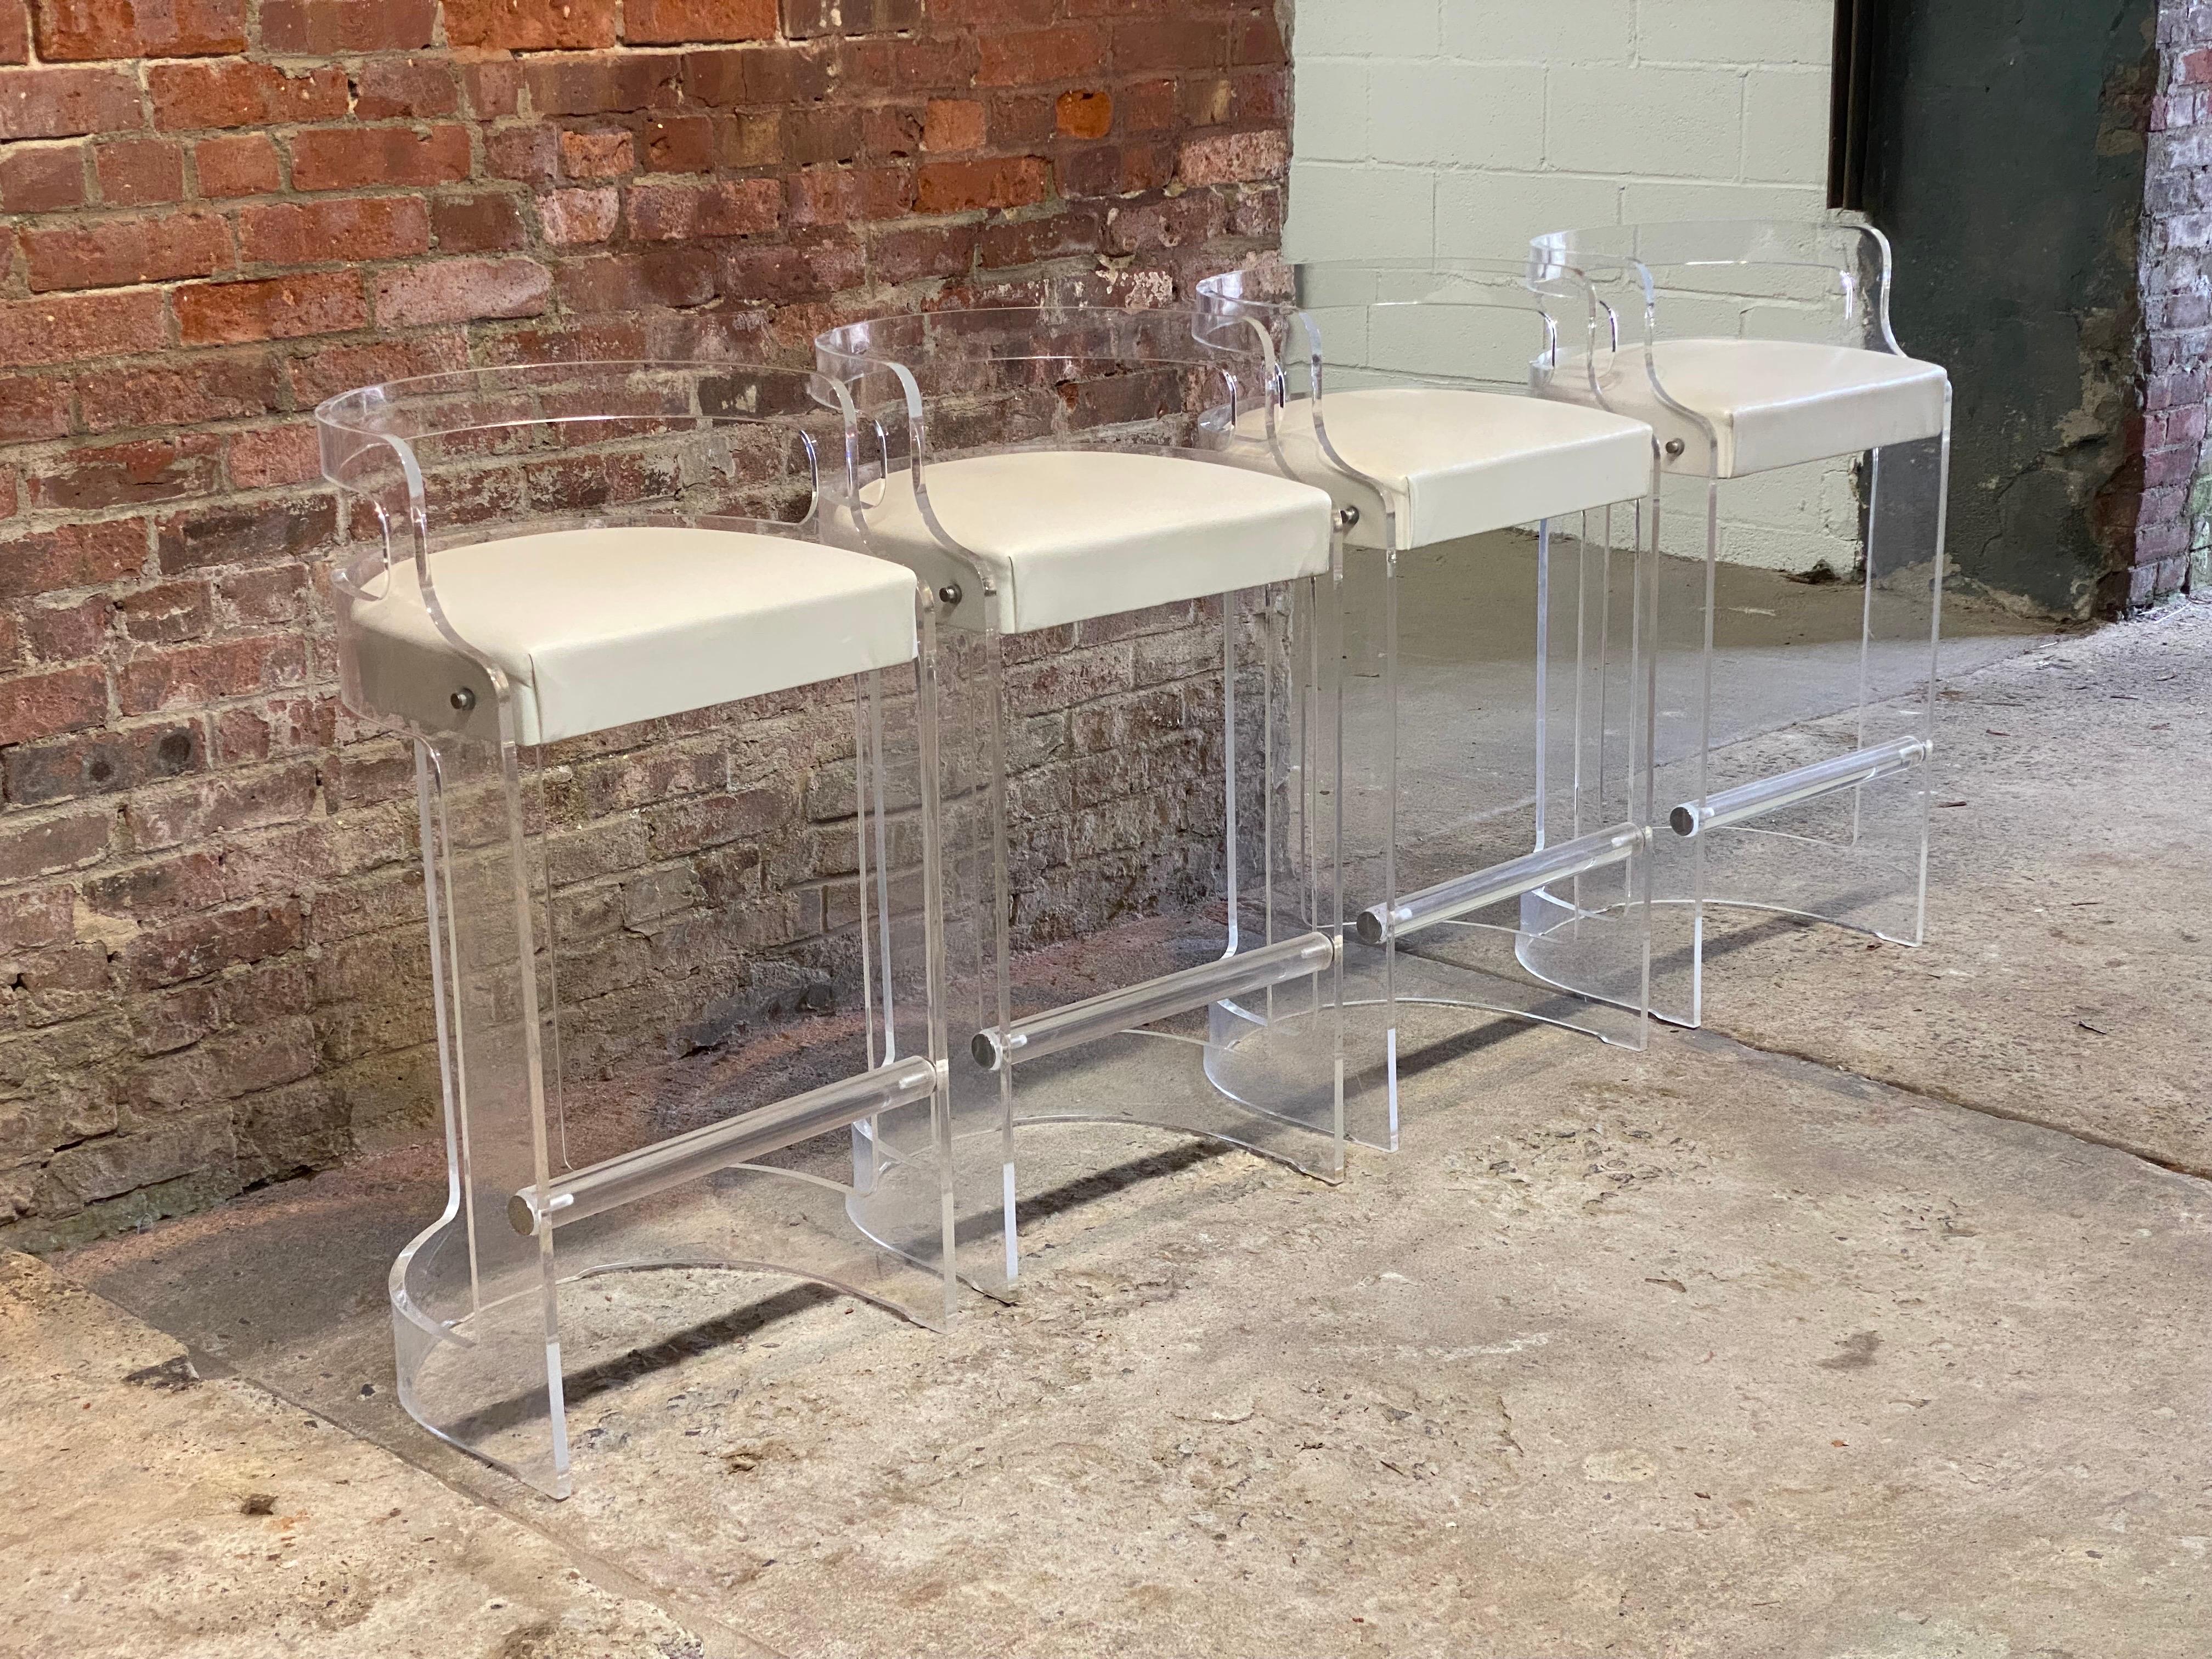 Set of four clear acrylic (Lucite) bar or counter stools produced by Hill Manufacturing Company, Newburgh , New York. Circa 1990-2000. One example is signed with its original label. Crystal clear lucite barrel back stools with foot rest and each is